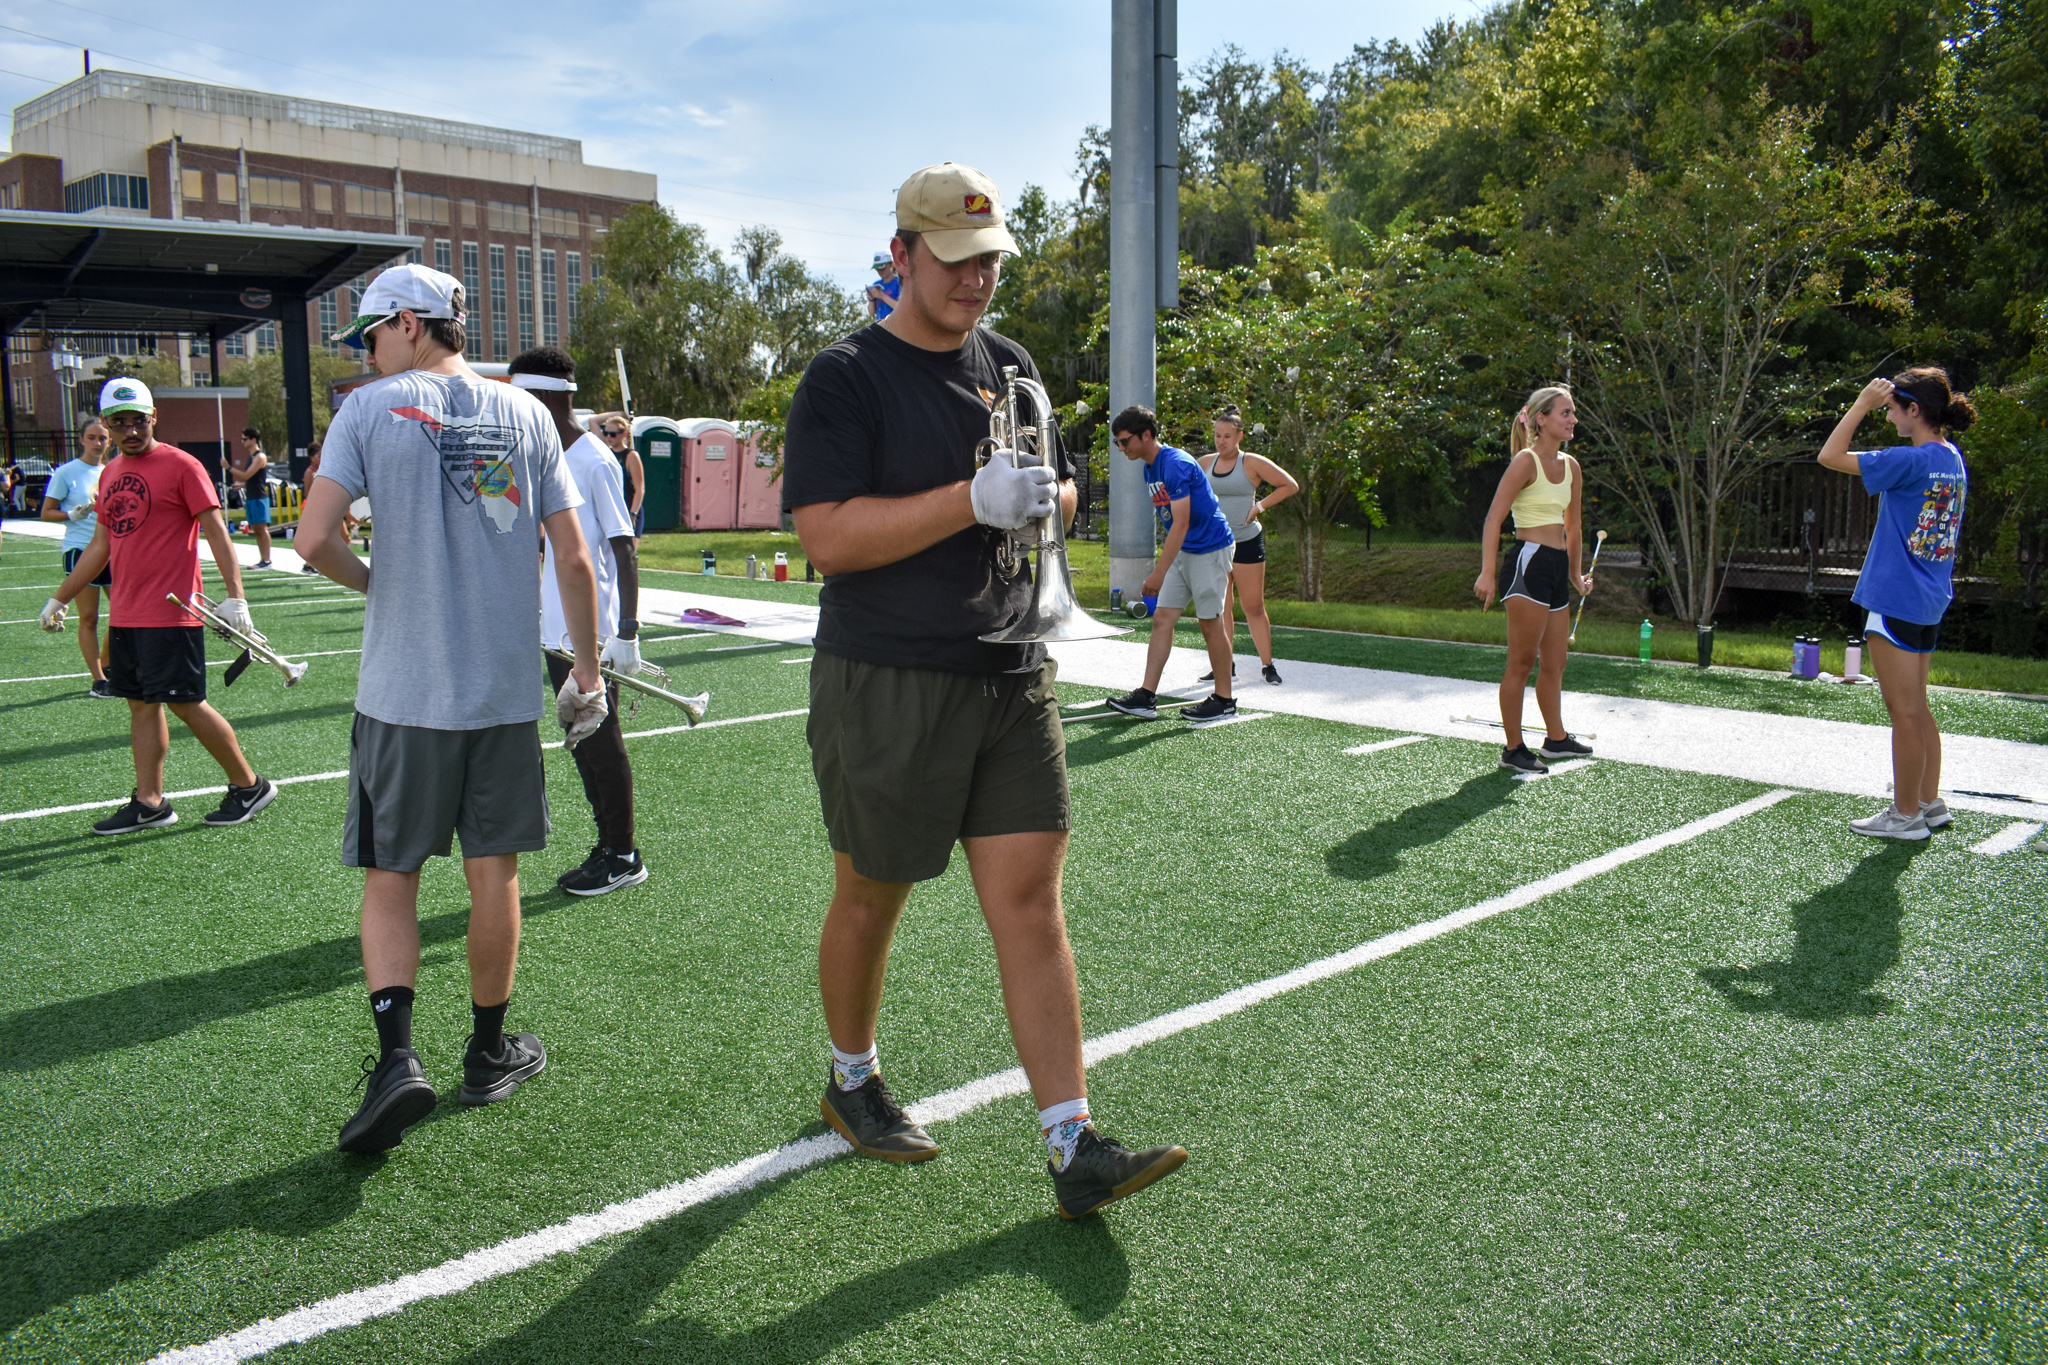 A student steps off a yard line on a football field while holding a mellophone.